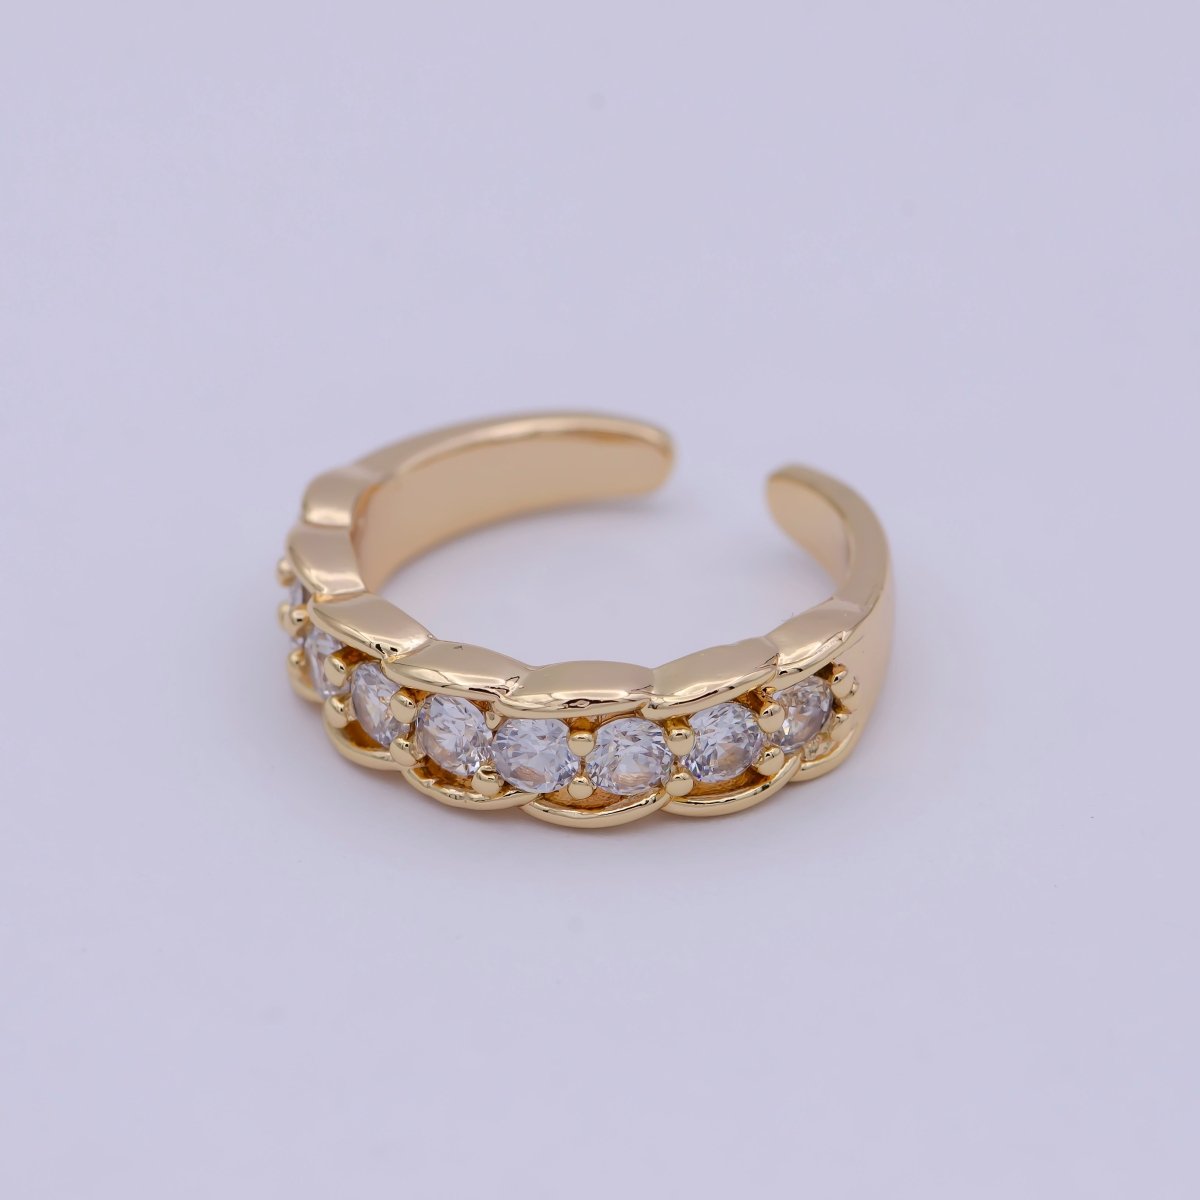 24K Gold Filled Minimalist Micro Pave Crystal Cubic Zirconia Bubble Adjustable Ring S-316 - DLUXCA